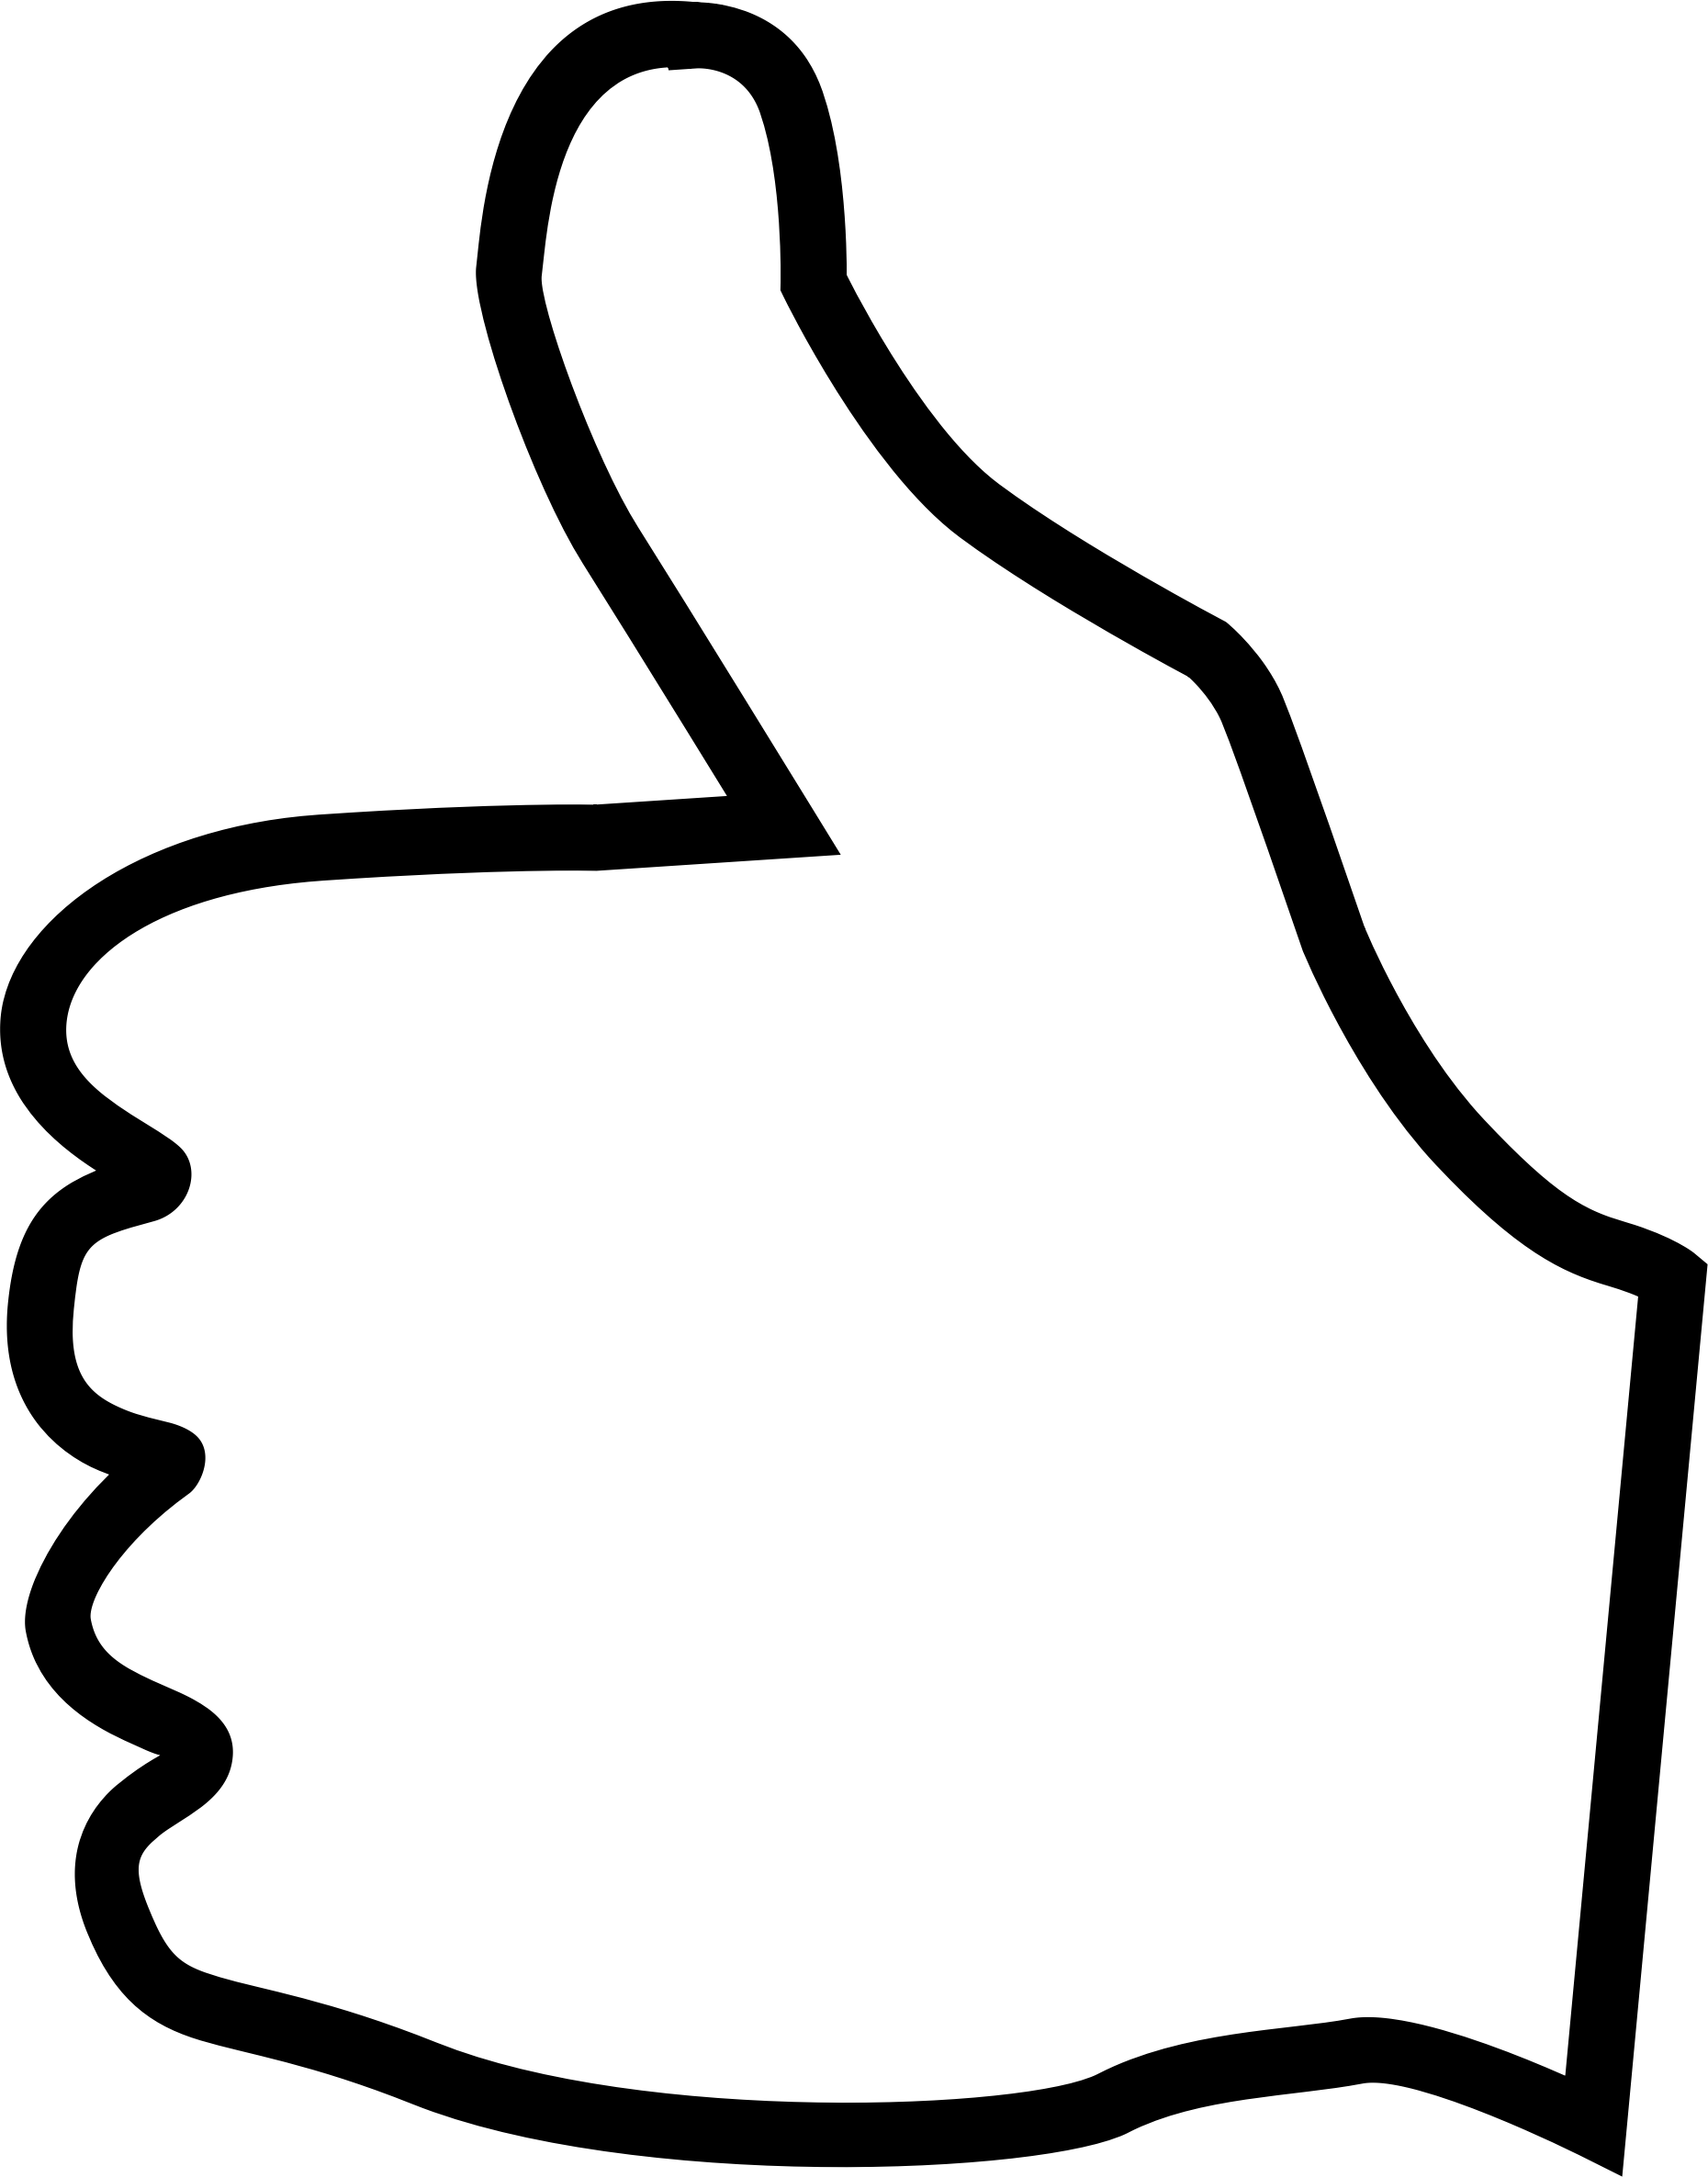 Smiley face clip art thumbs u - Thumbs Up Clipart Free